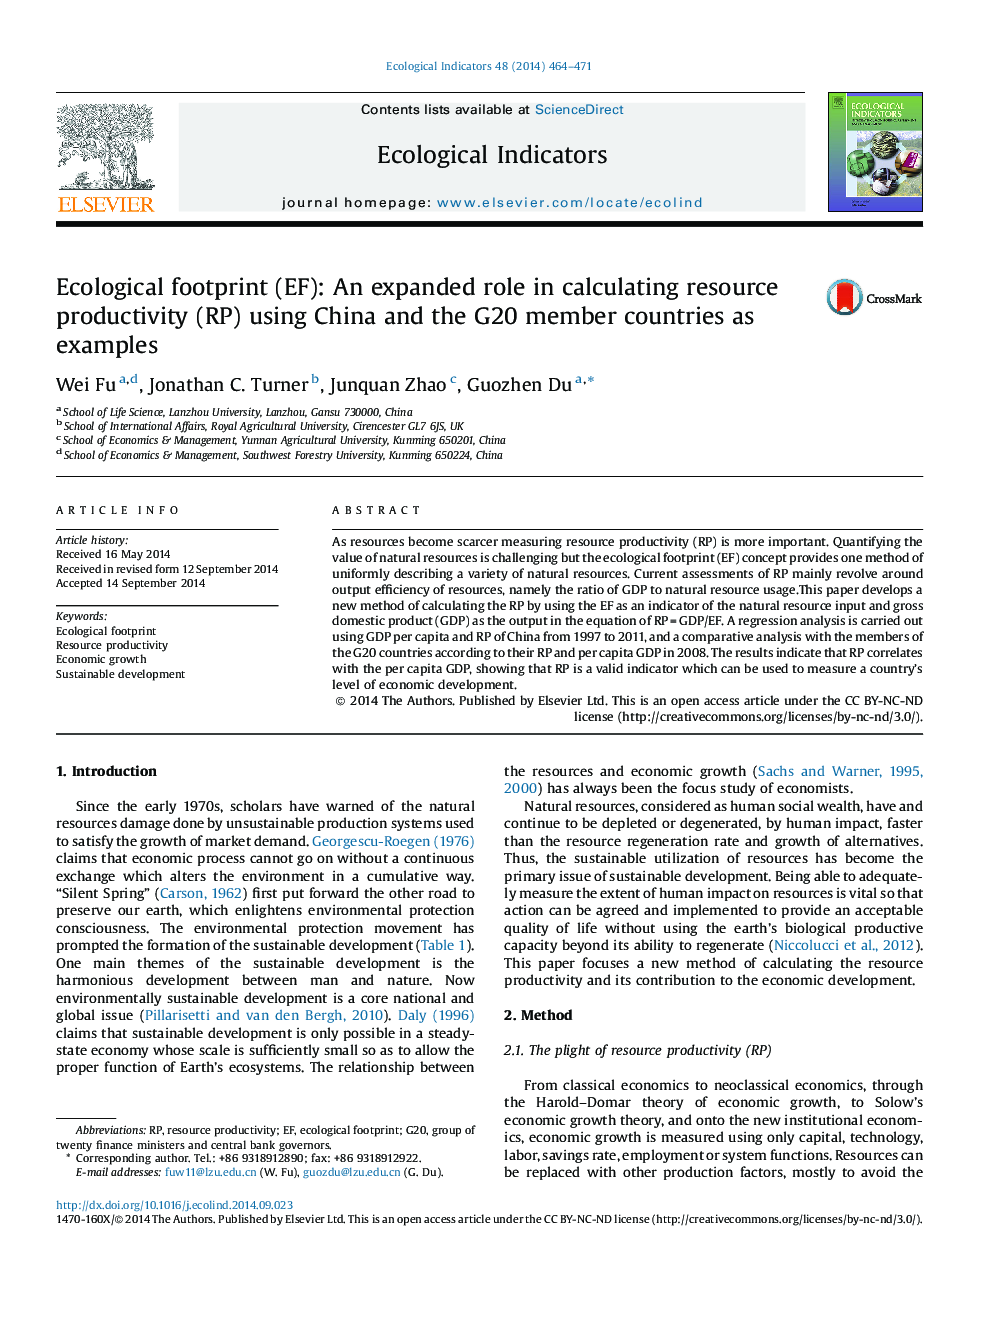 Ecological footprint (EF): An expanded role in calculating resource productivity (RP) using China and the G20 member countries as examples